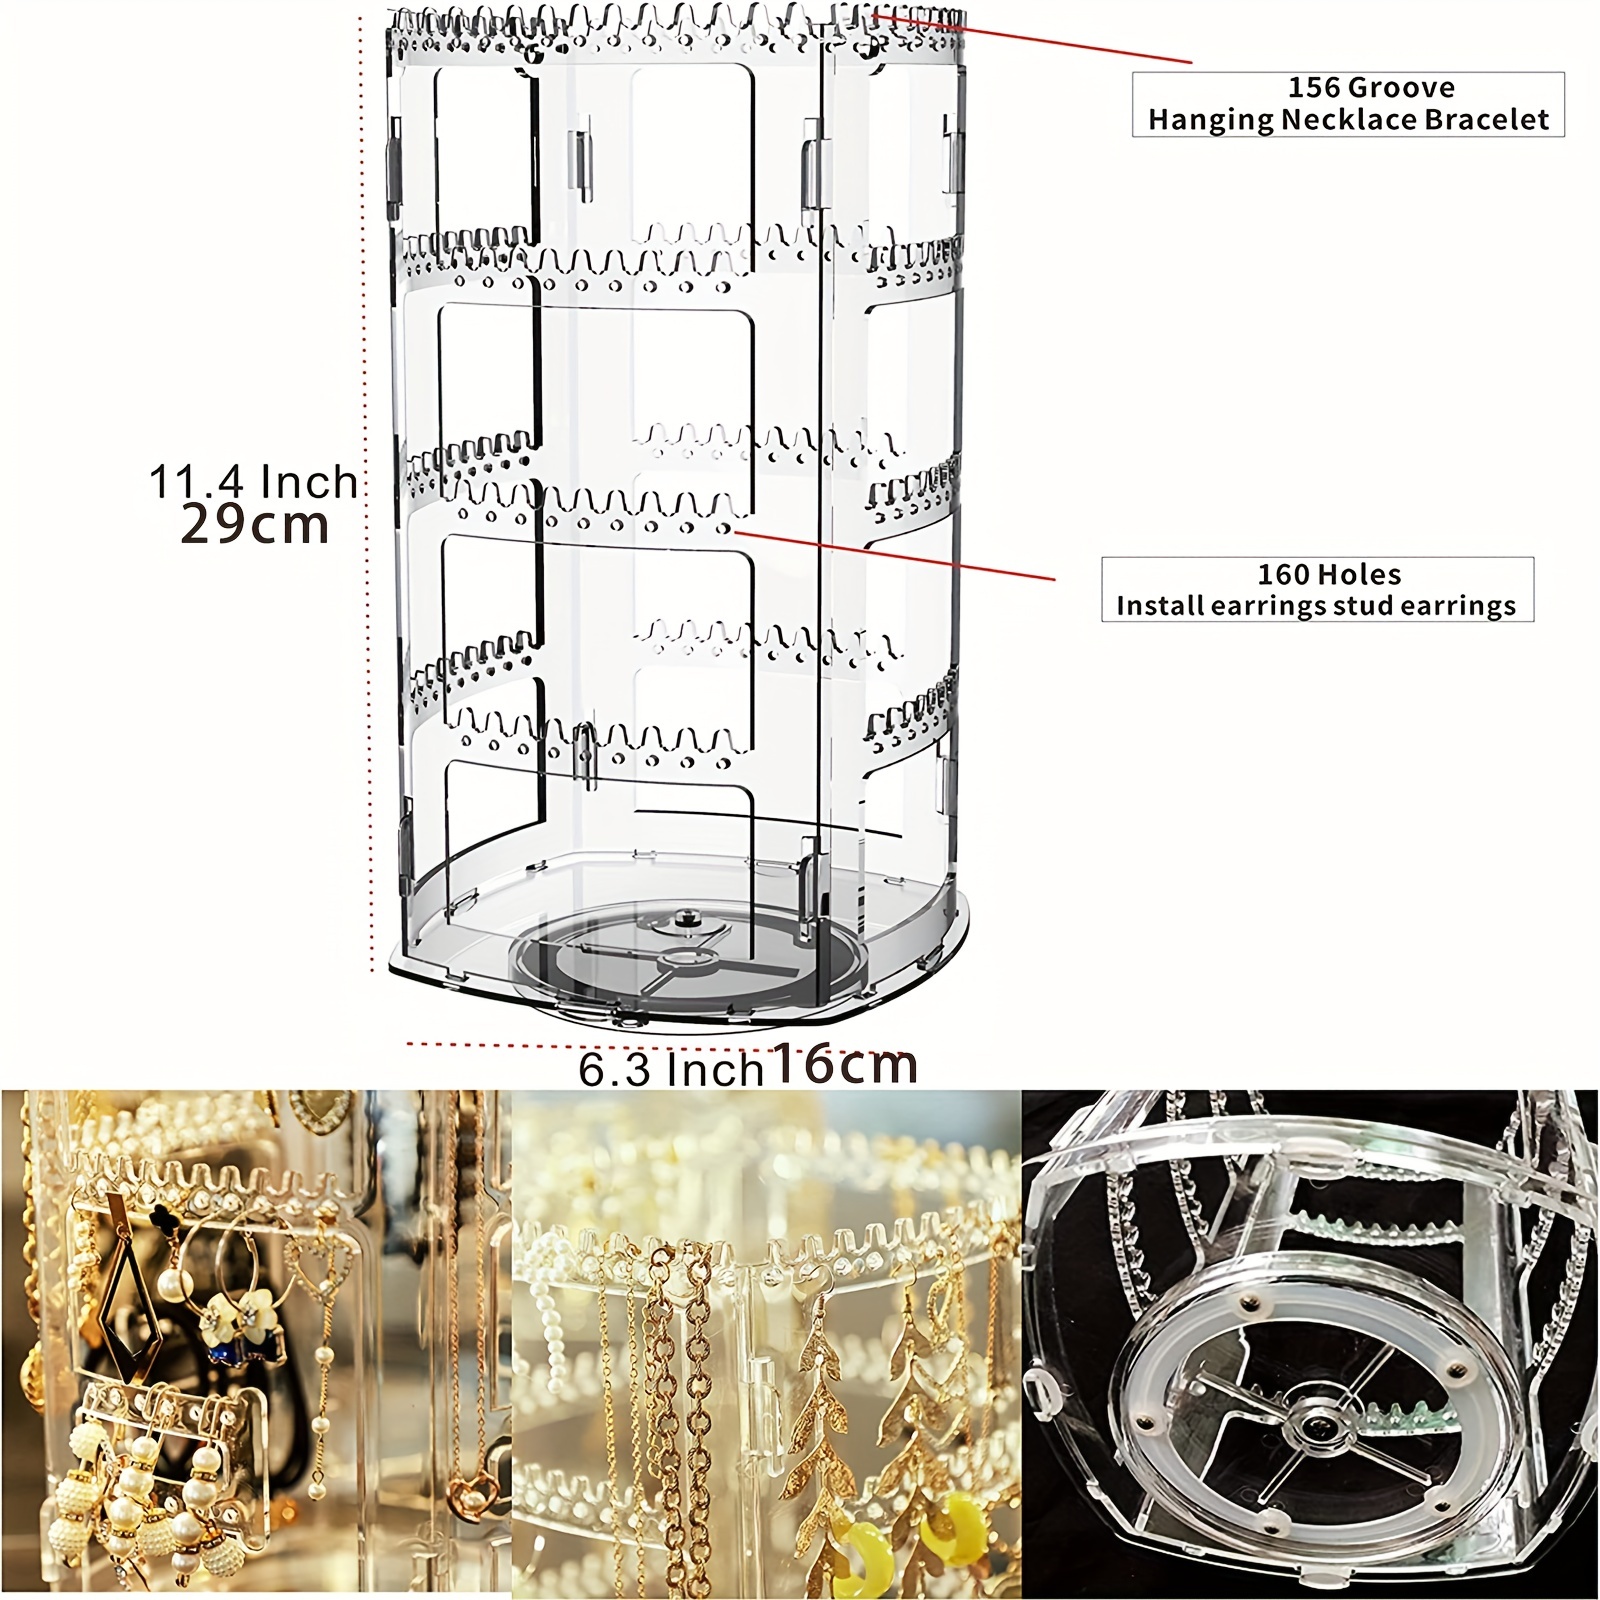 Earring Holder Organizer 360 Rotating Earring Storage Metal Jewlery Holder  Jewerly Organizer 4 Tiers Earring Display Stands